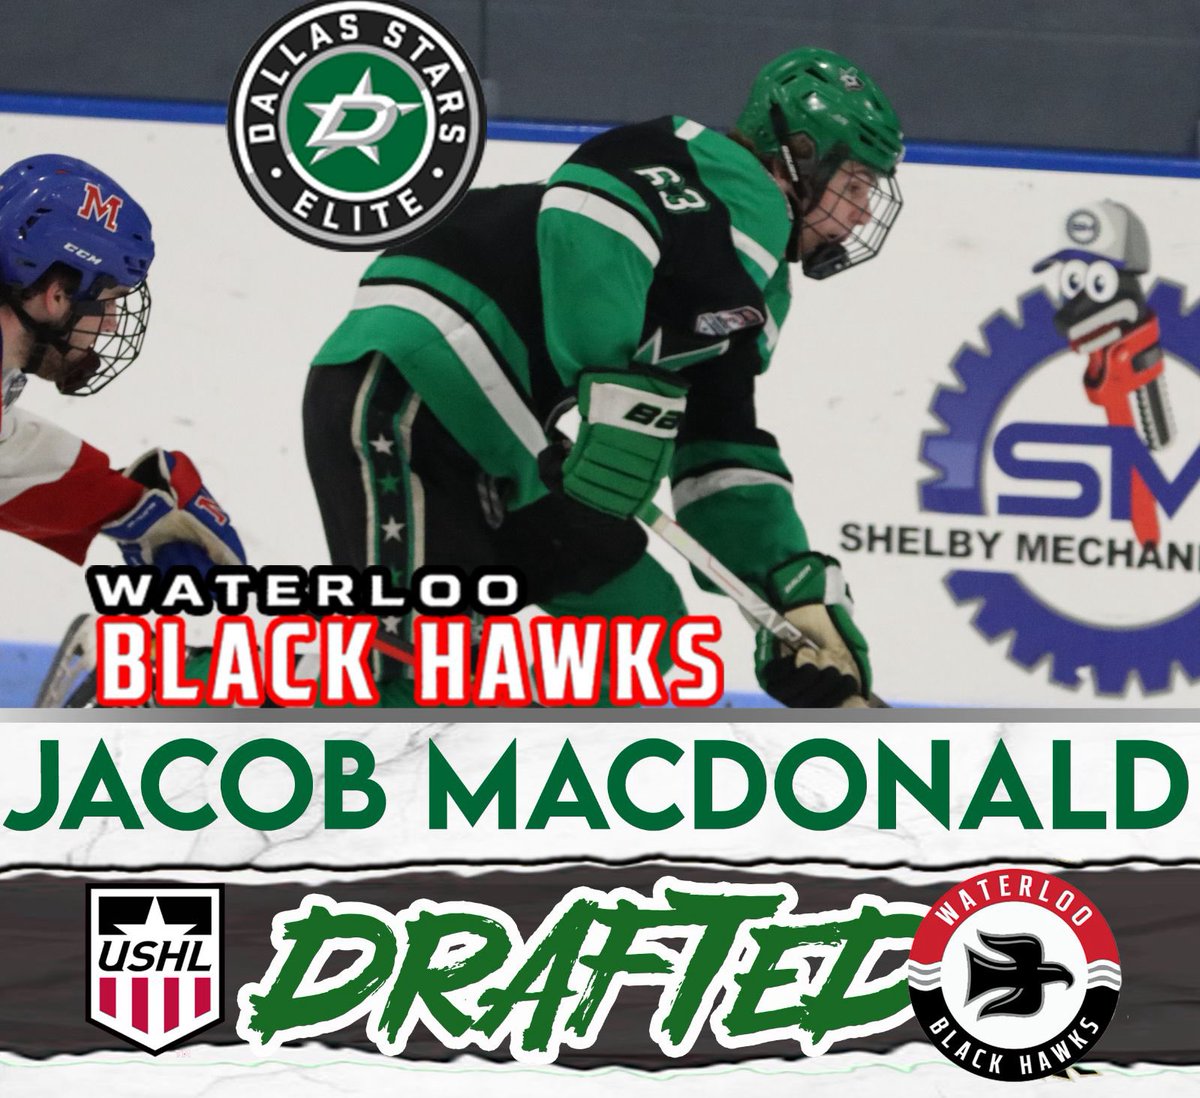 Congratulations to DSE alum Jacob MacDonald on being drafted in the Phase II USHL draft to the Waterloo Blackhawks! 💚🖤

#gostarselite #elitedna #GreenHelmets